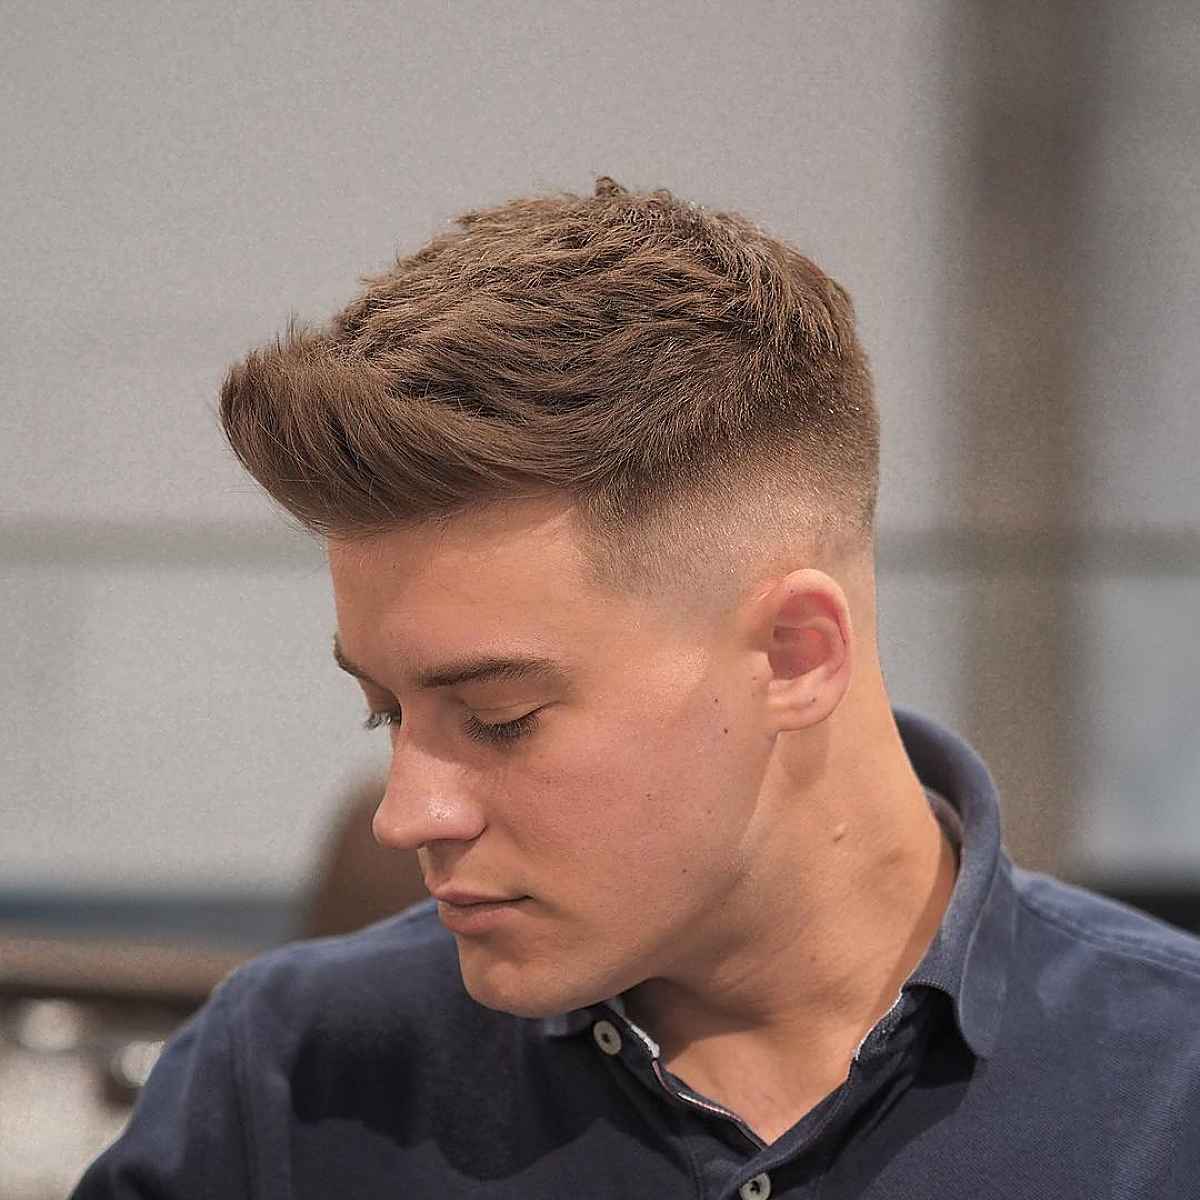 The Quiff Hairstyle: What It Is & How To Style It | FashionBeans